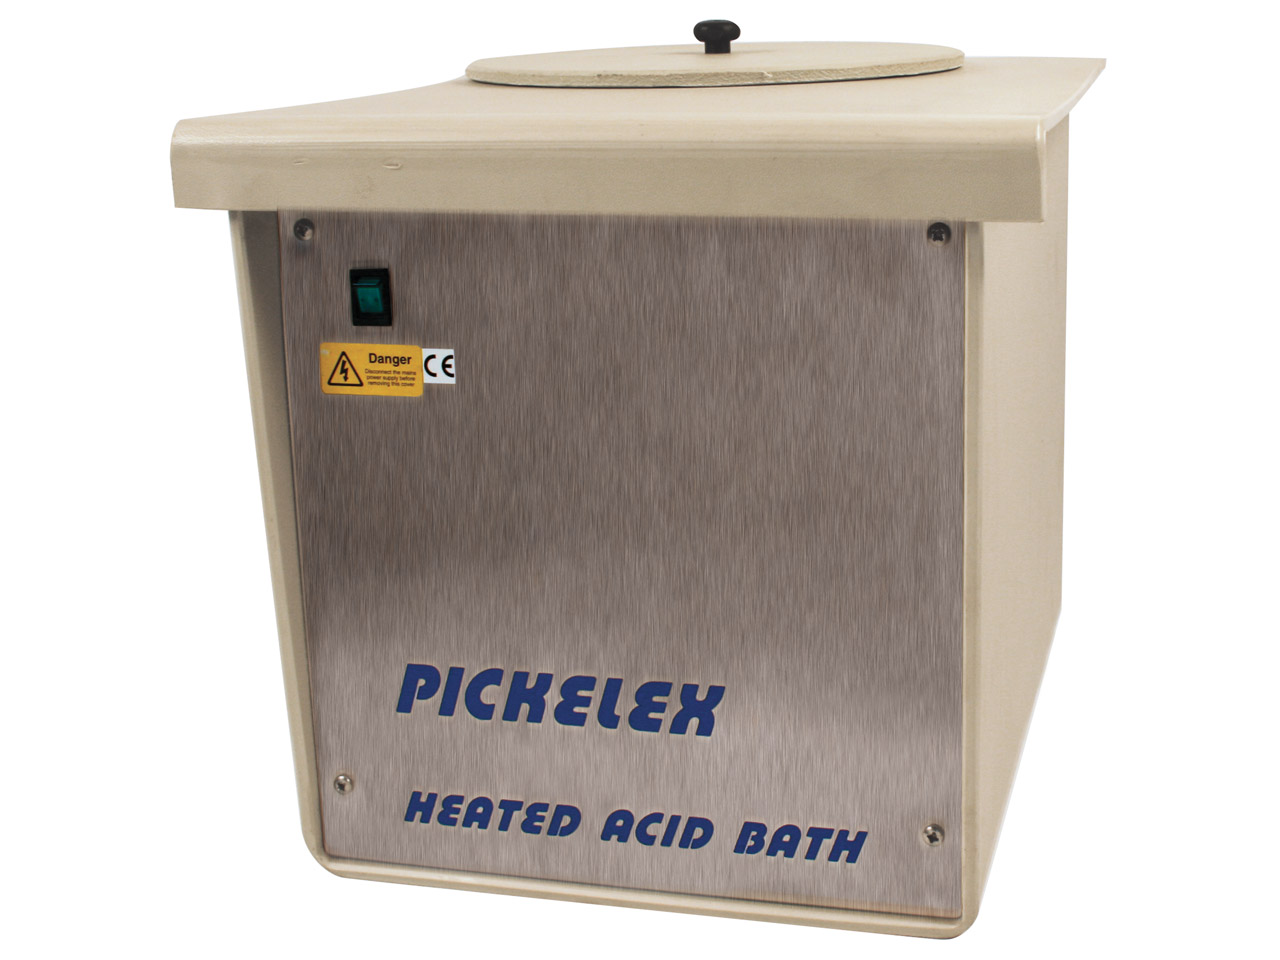 Do you have instructions for Pickelex Pickling Unit 5 Litre?